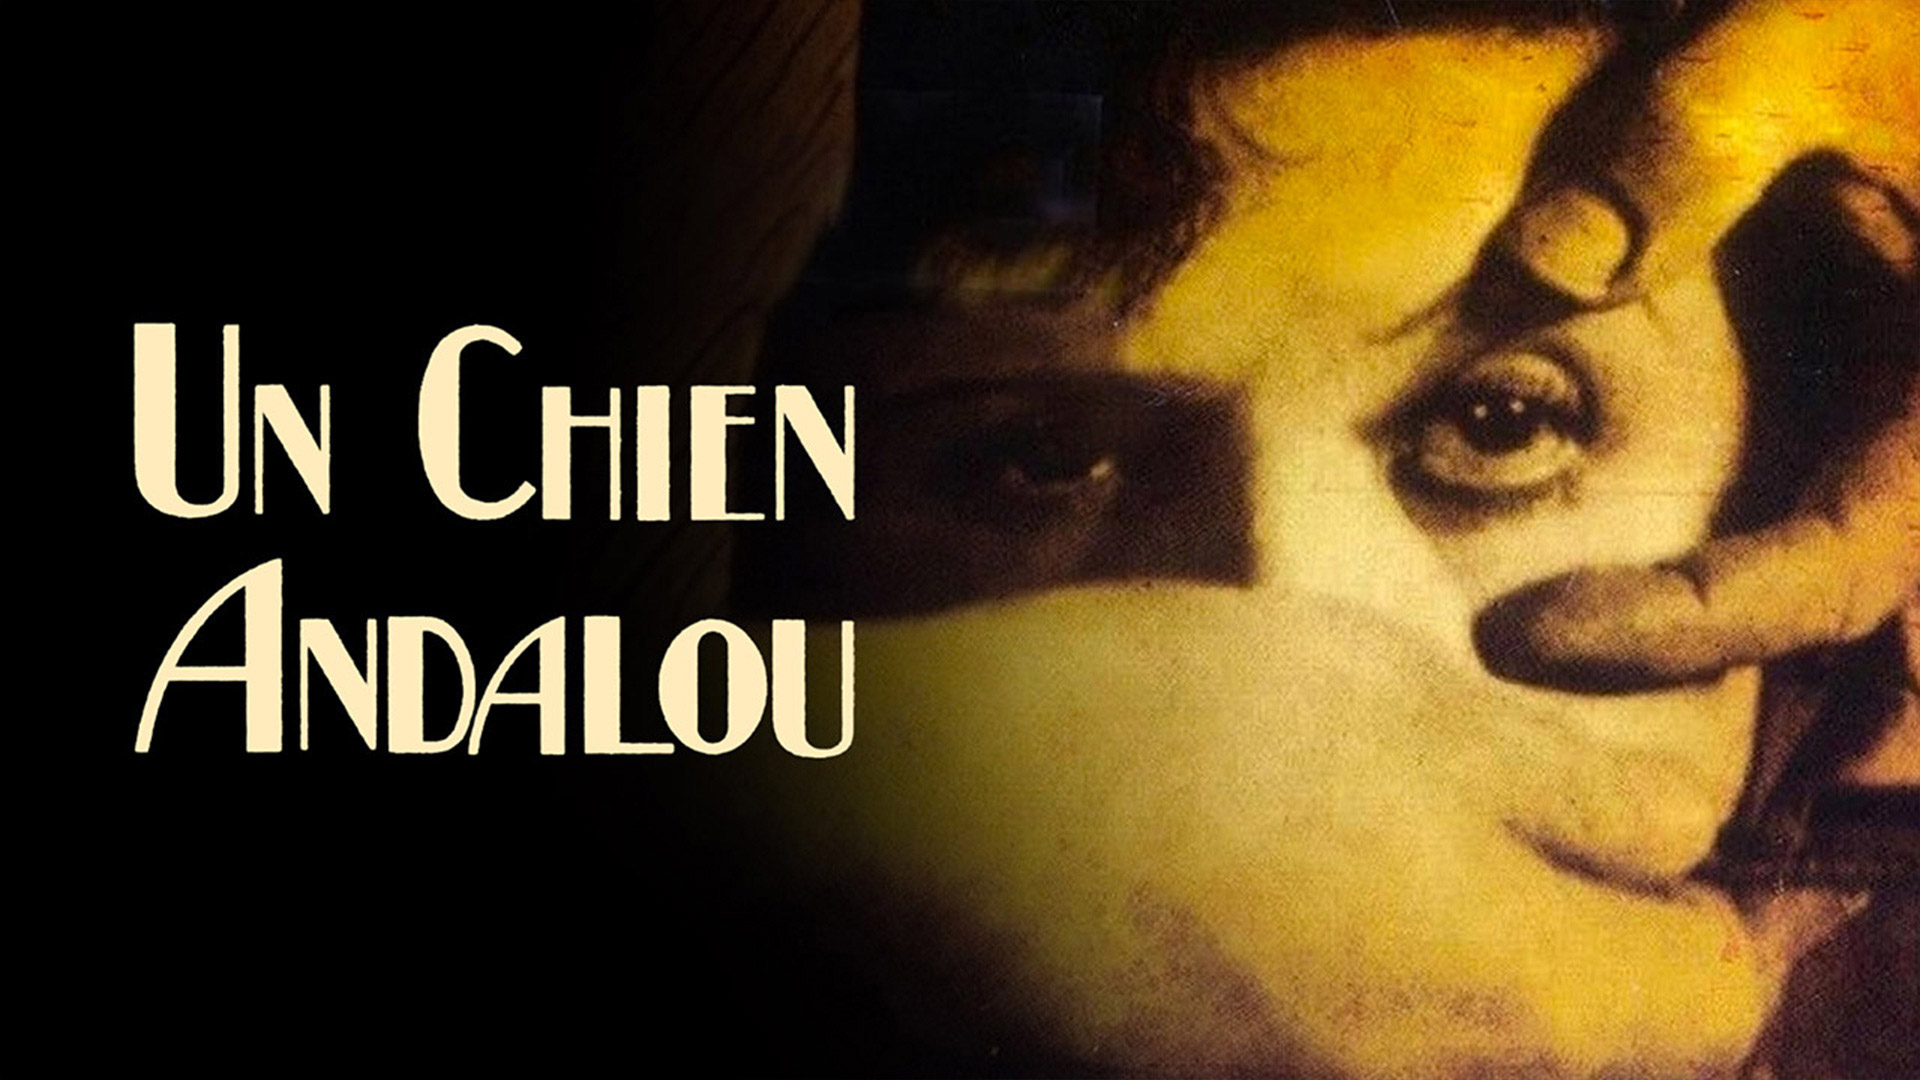 43-facts-about-the-movie-un-chien-andalou